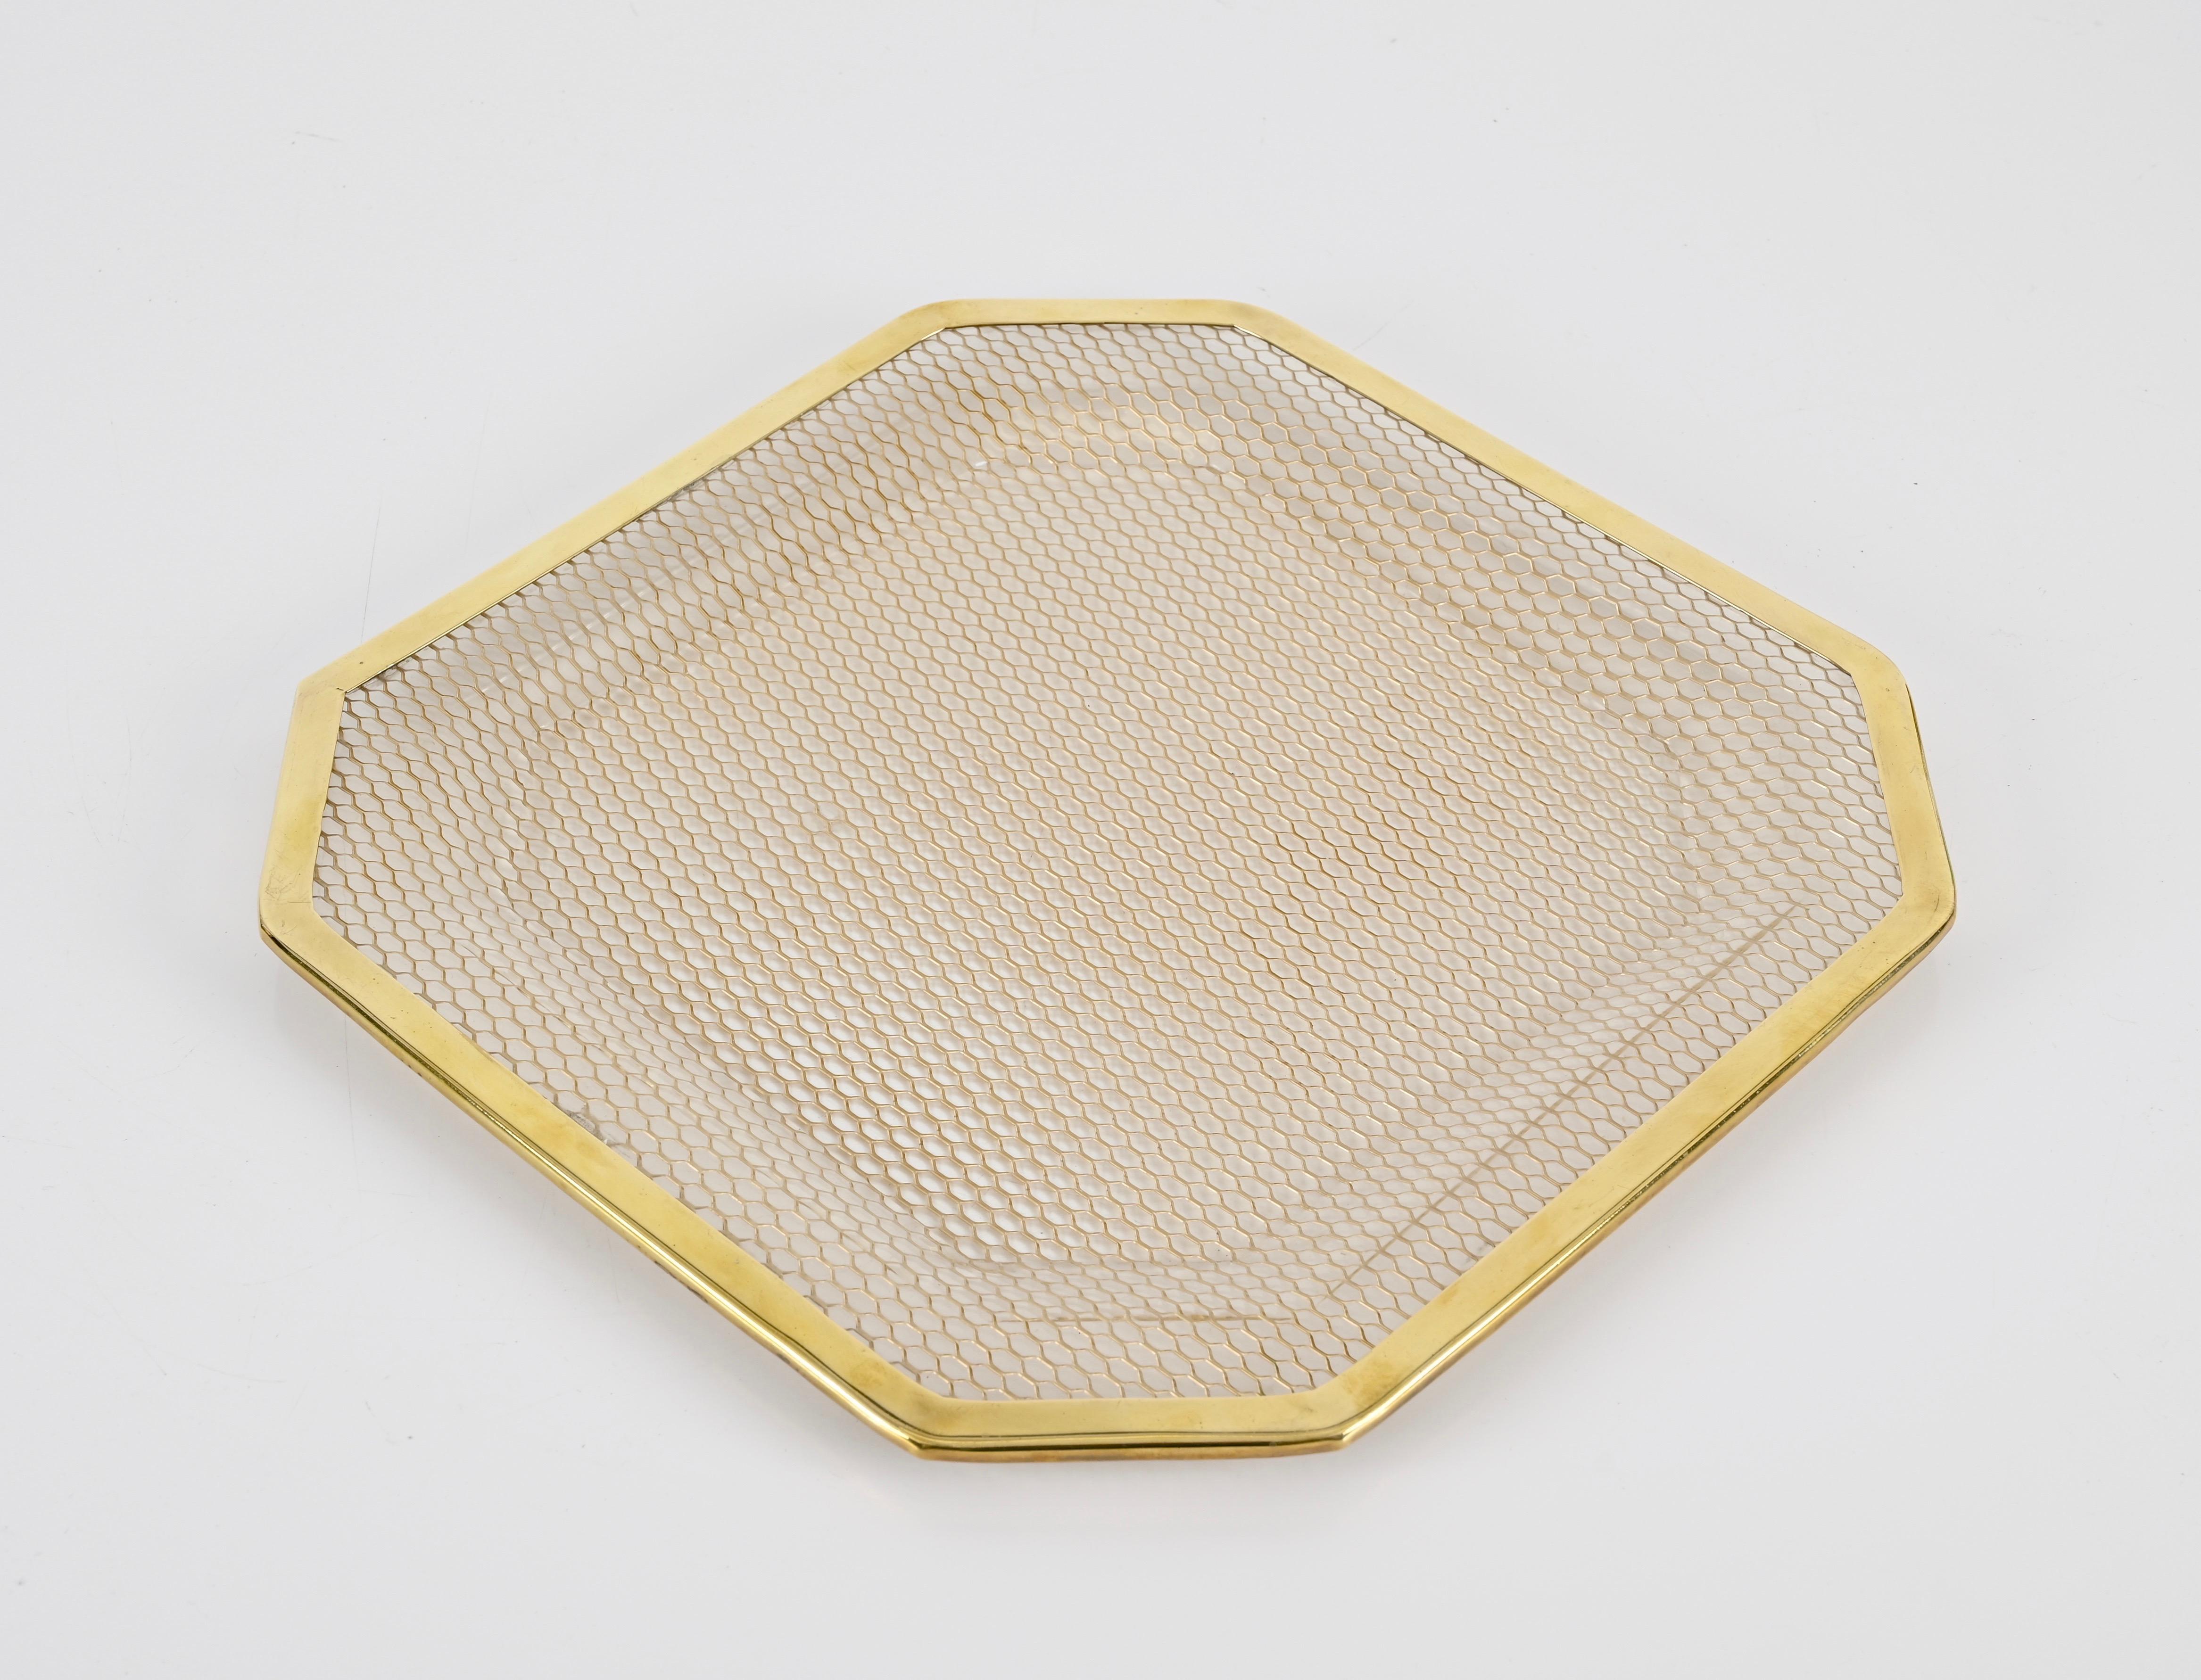 Midcentury Lucite and Brass Octagonal Italian Tray, Willy Rizzo Style, 1970s For Sale 2